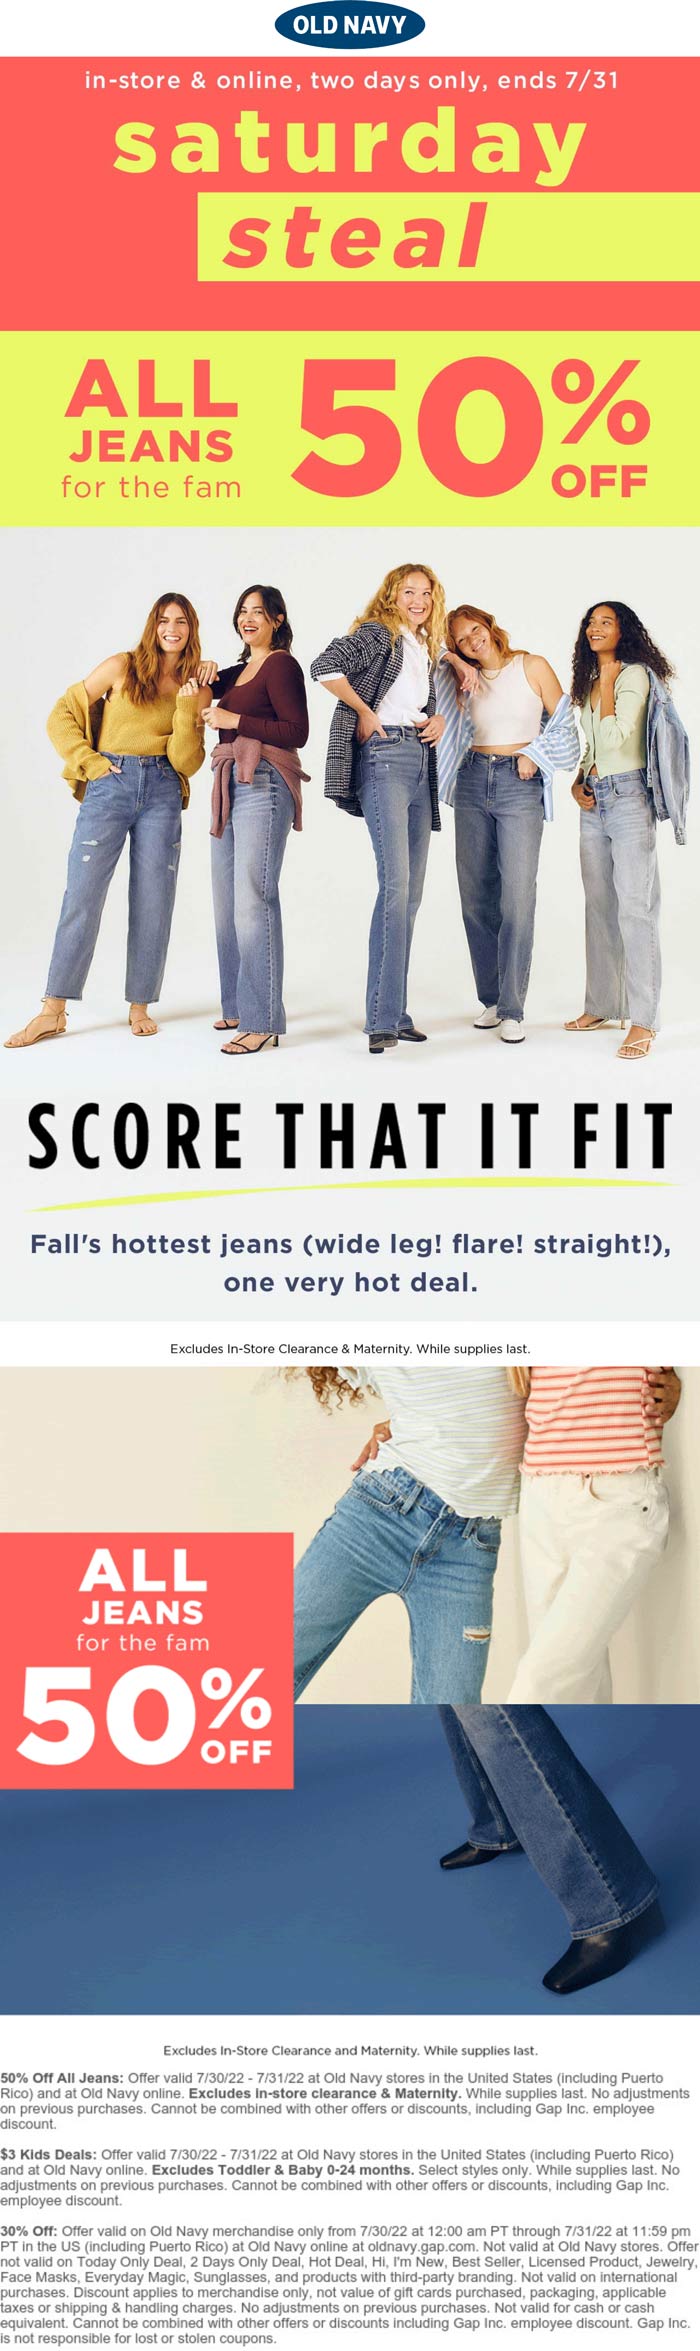 Old Navy stores Coupon  50% off all jeans at Old Navy, ditto online #oldnavy 